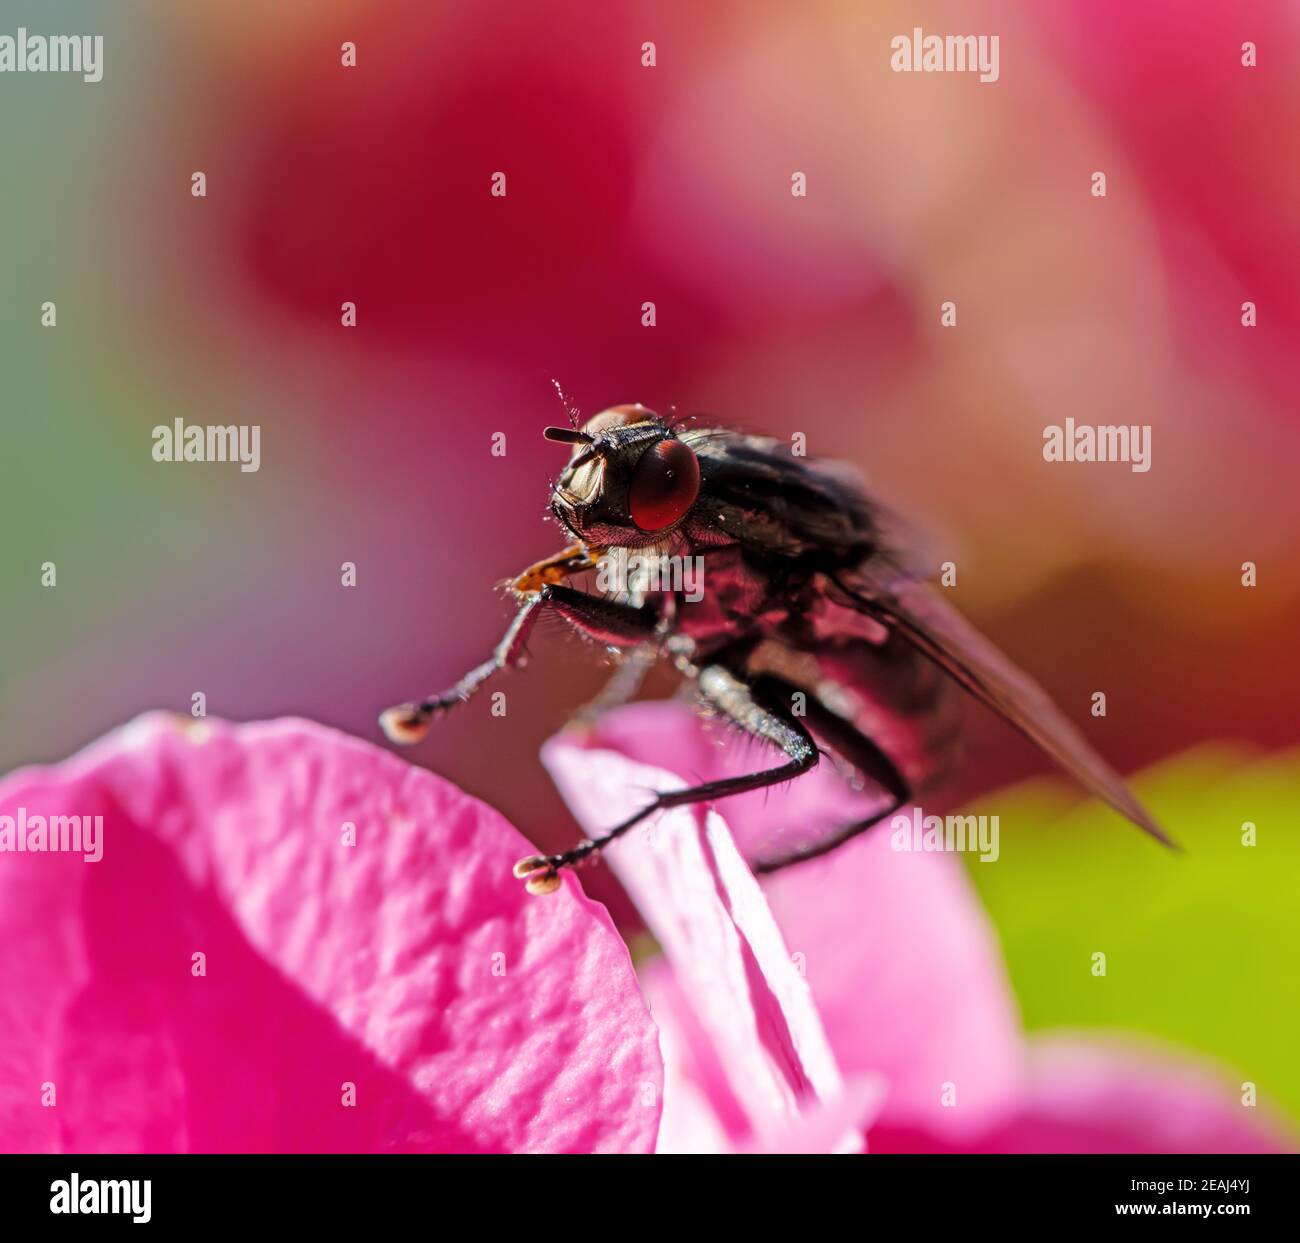 Macro of a fly on a blossom Stock Photo